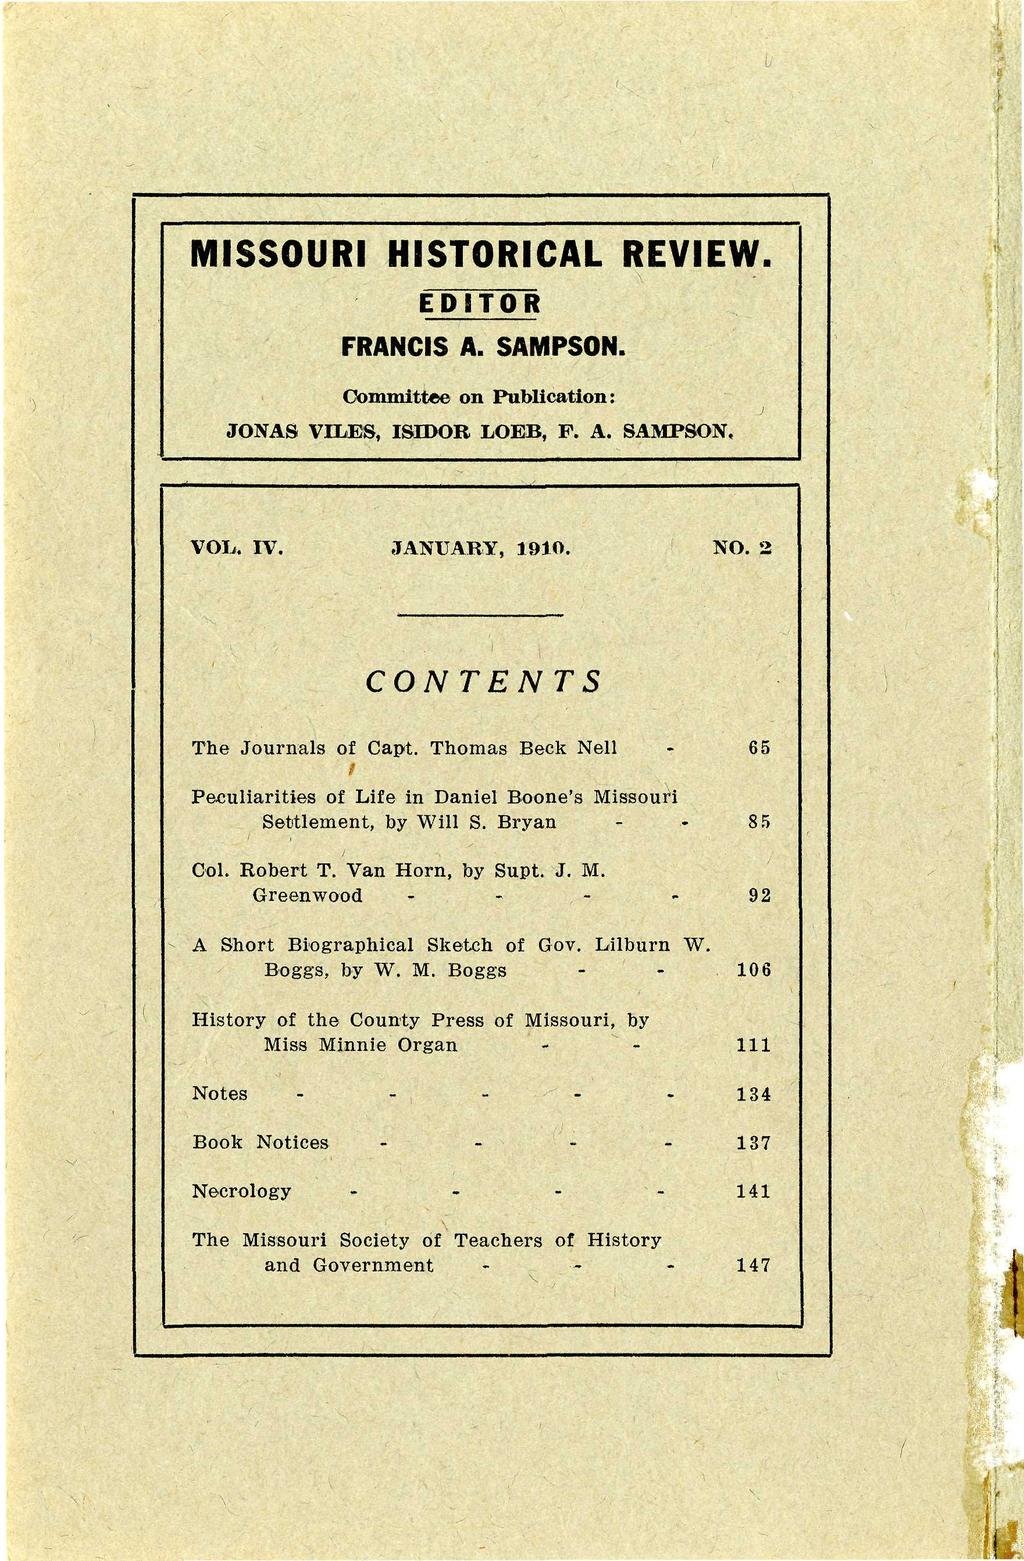 . l> MISSOURI HISTORICAL REVIEW. EDITOR FRANCIS A. SAMPSON. Committee on Publication: JONAS VILES, ISroOR LOEB, P. A. SAMPSON. VOL. IV. JANUARY, 1910. NO. 2 CONTENTS The Journals of Capt.